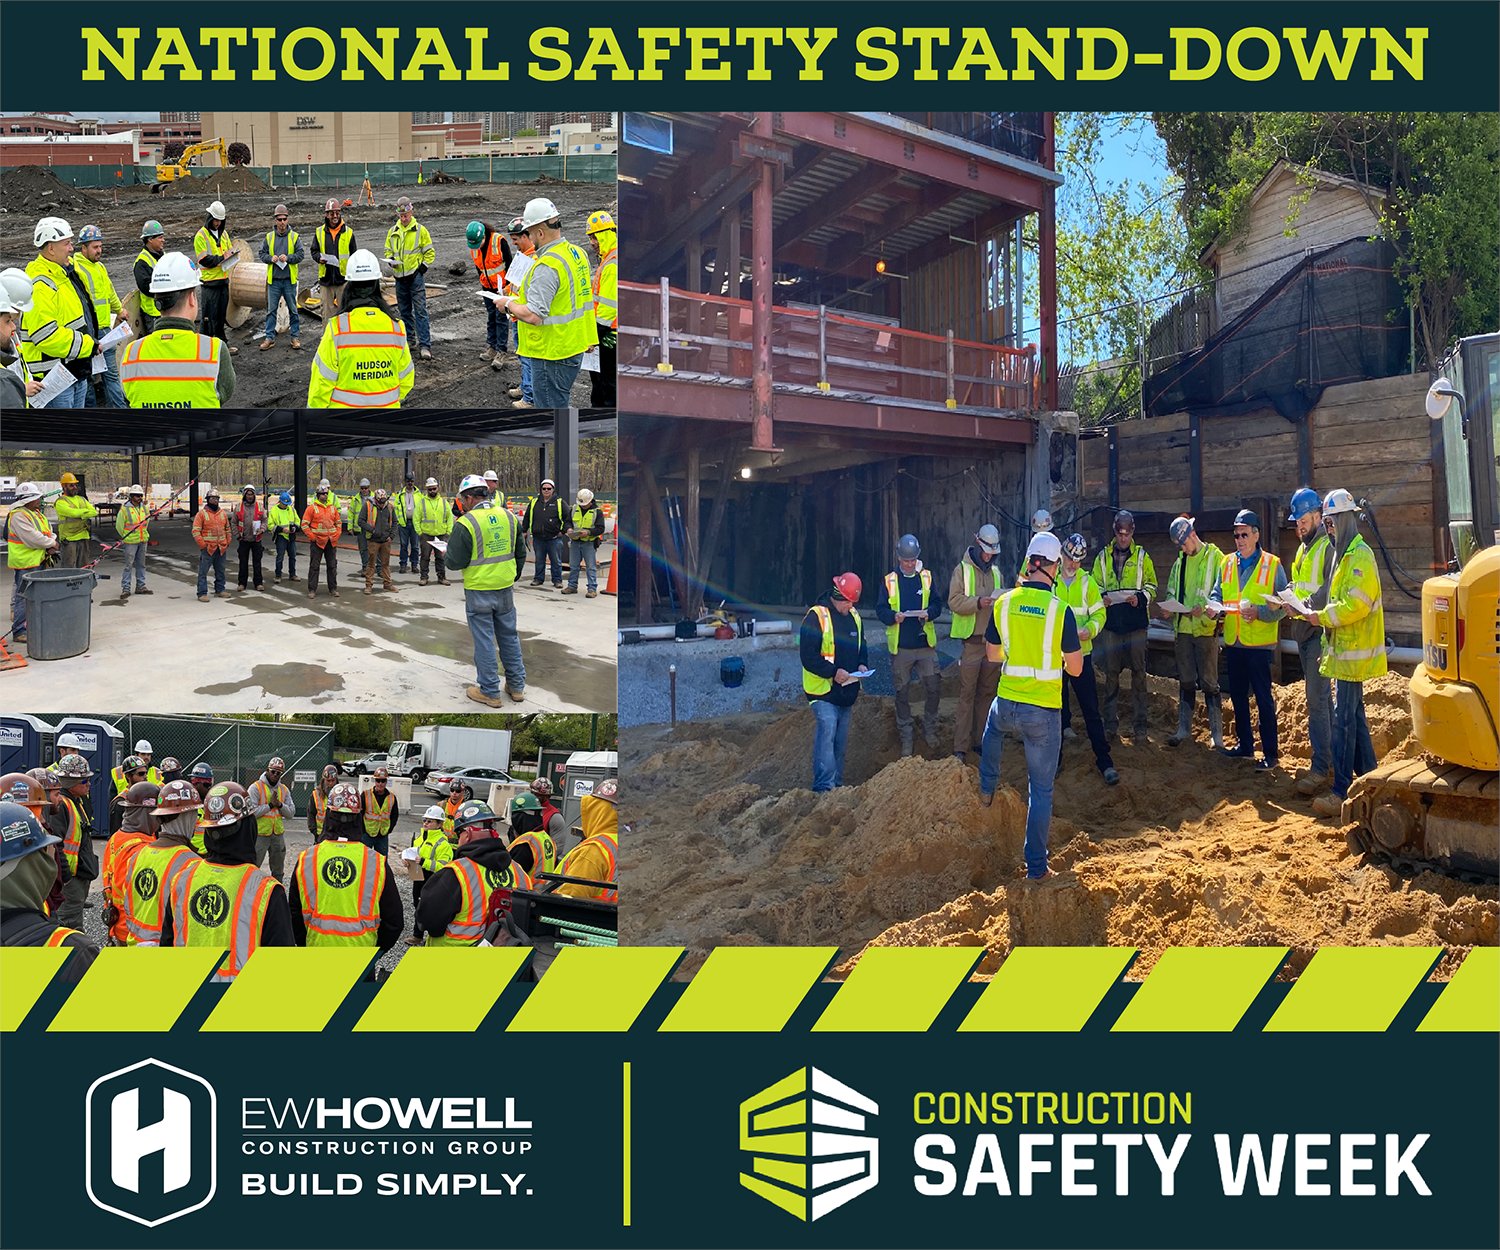 EW Howell National Safety Stand-Down for Construction Safety Week